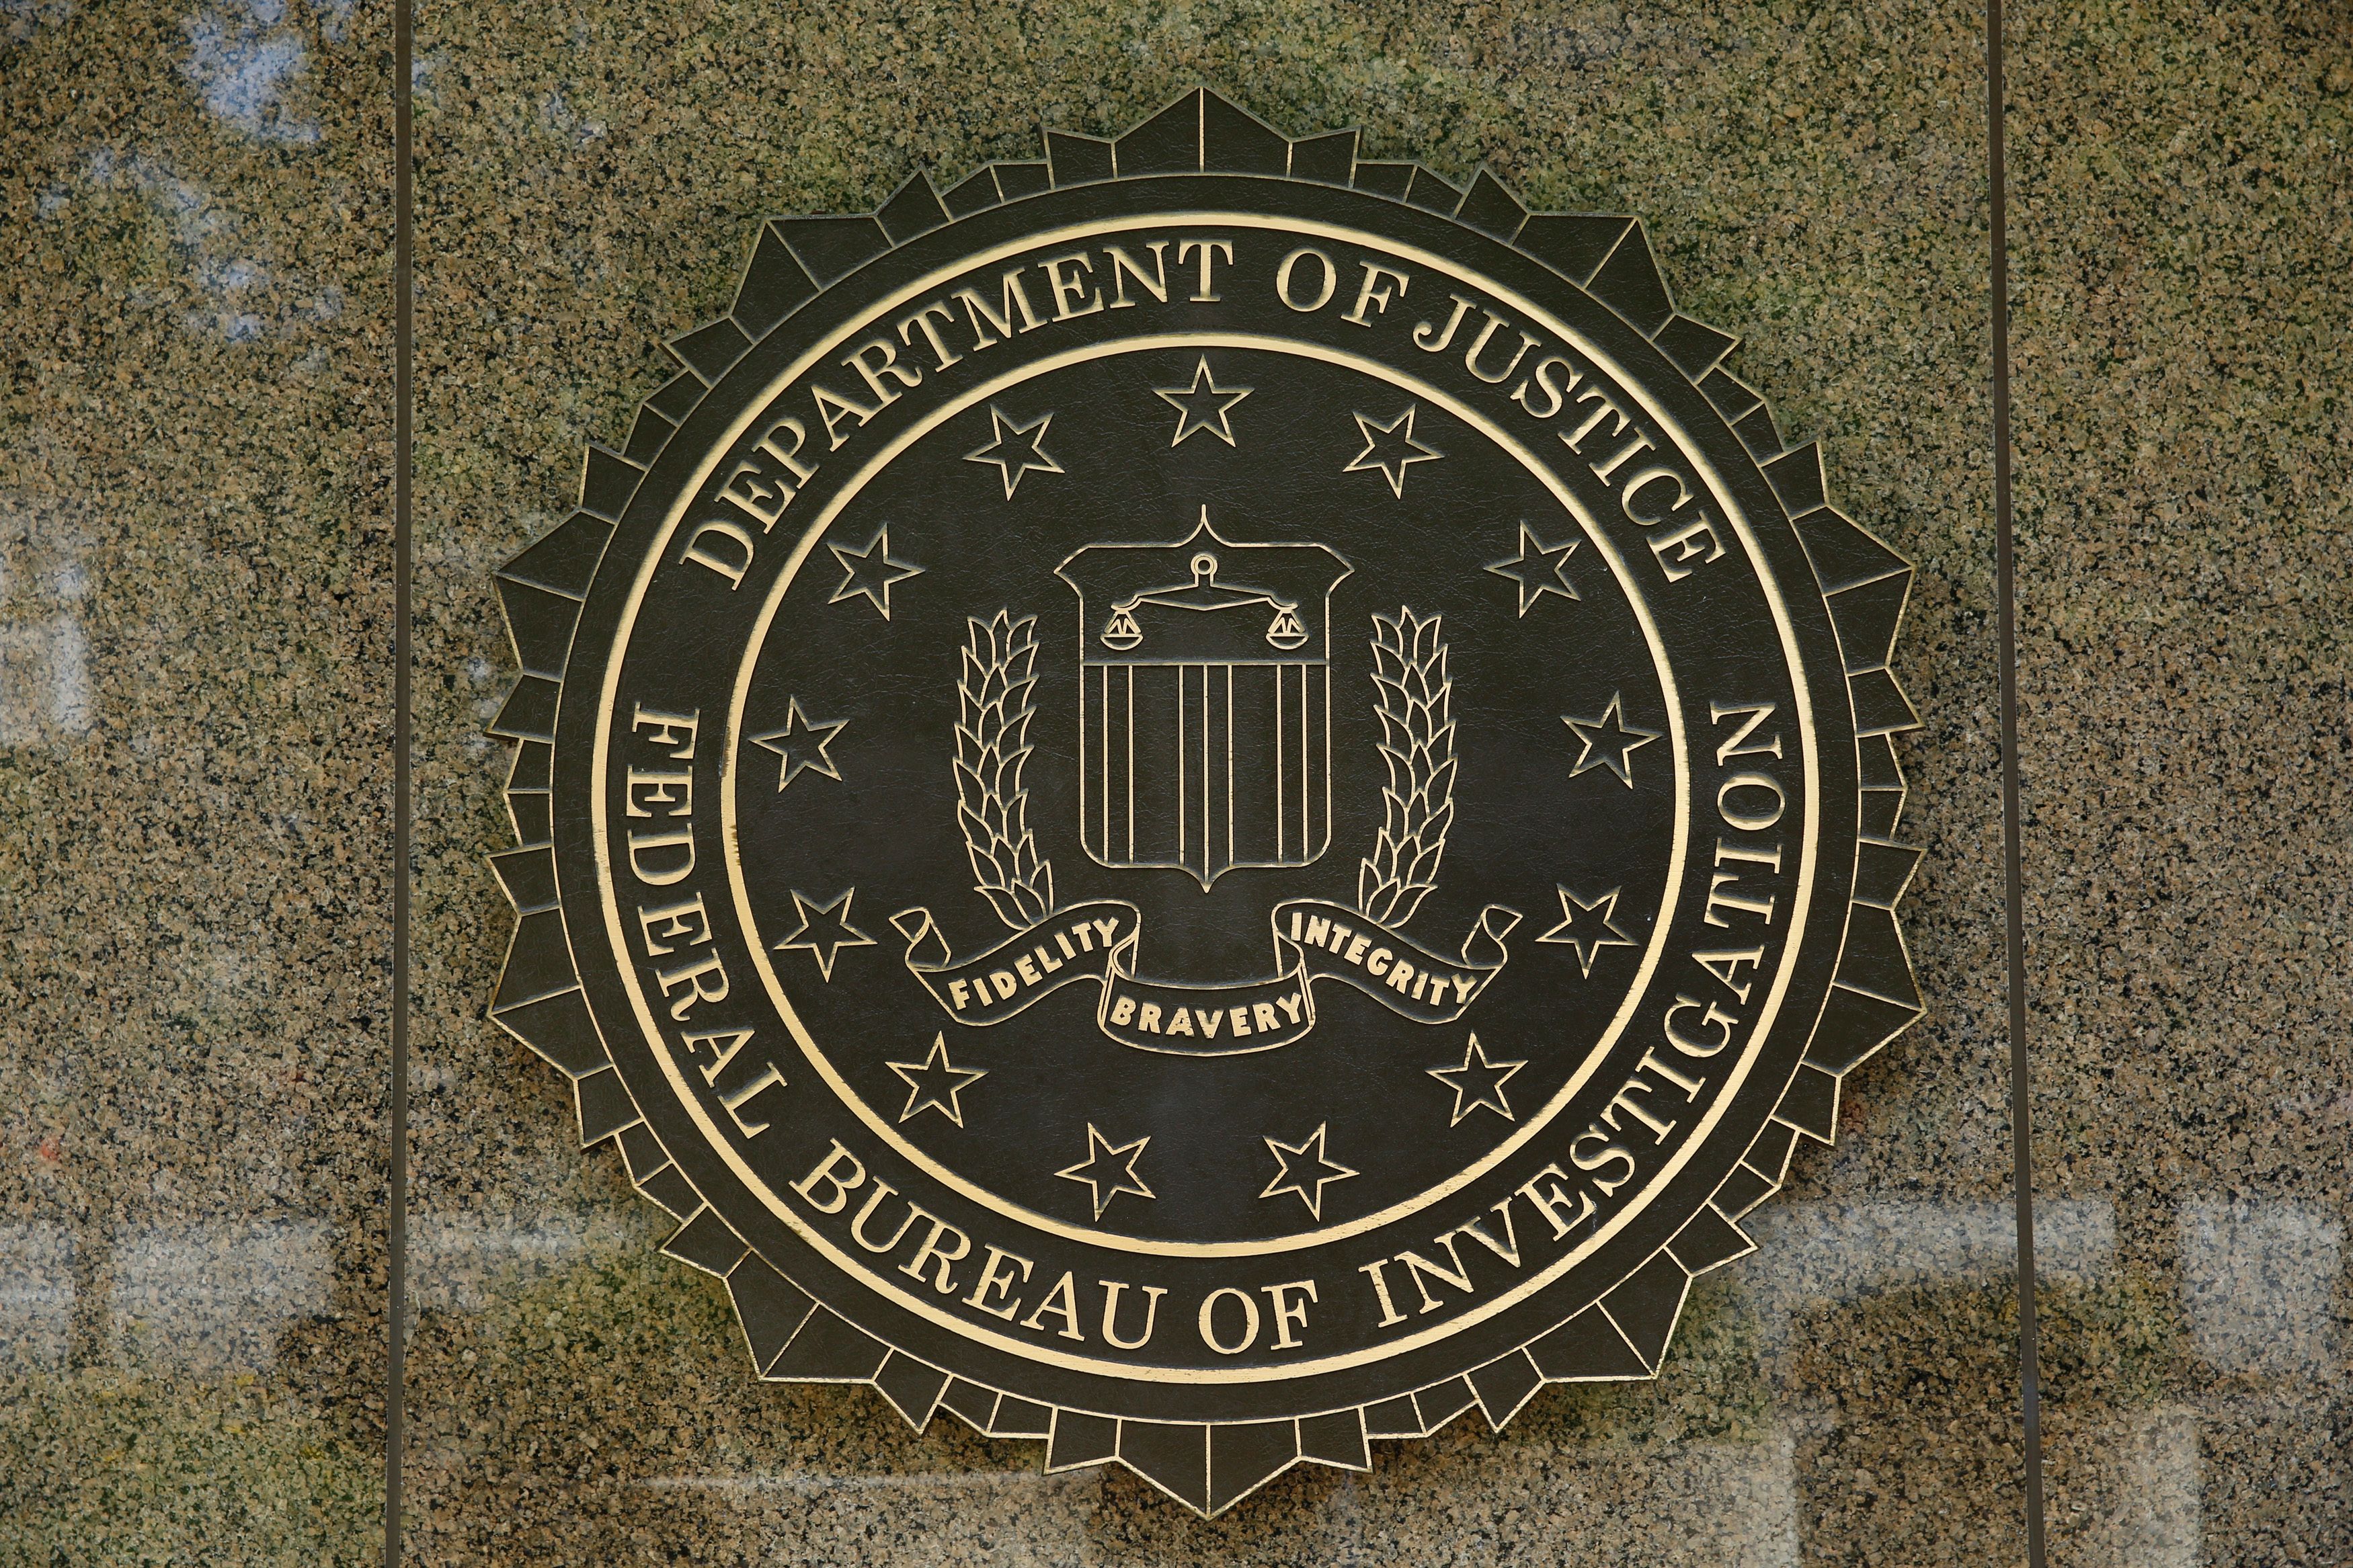 The FBI logo is seen outside the headquarters building in Washington, DC on July 5, 2016. (Getty)